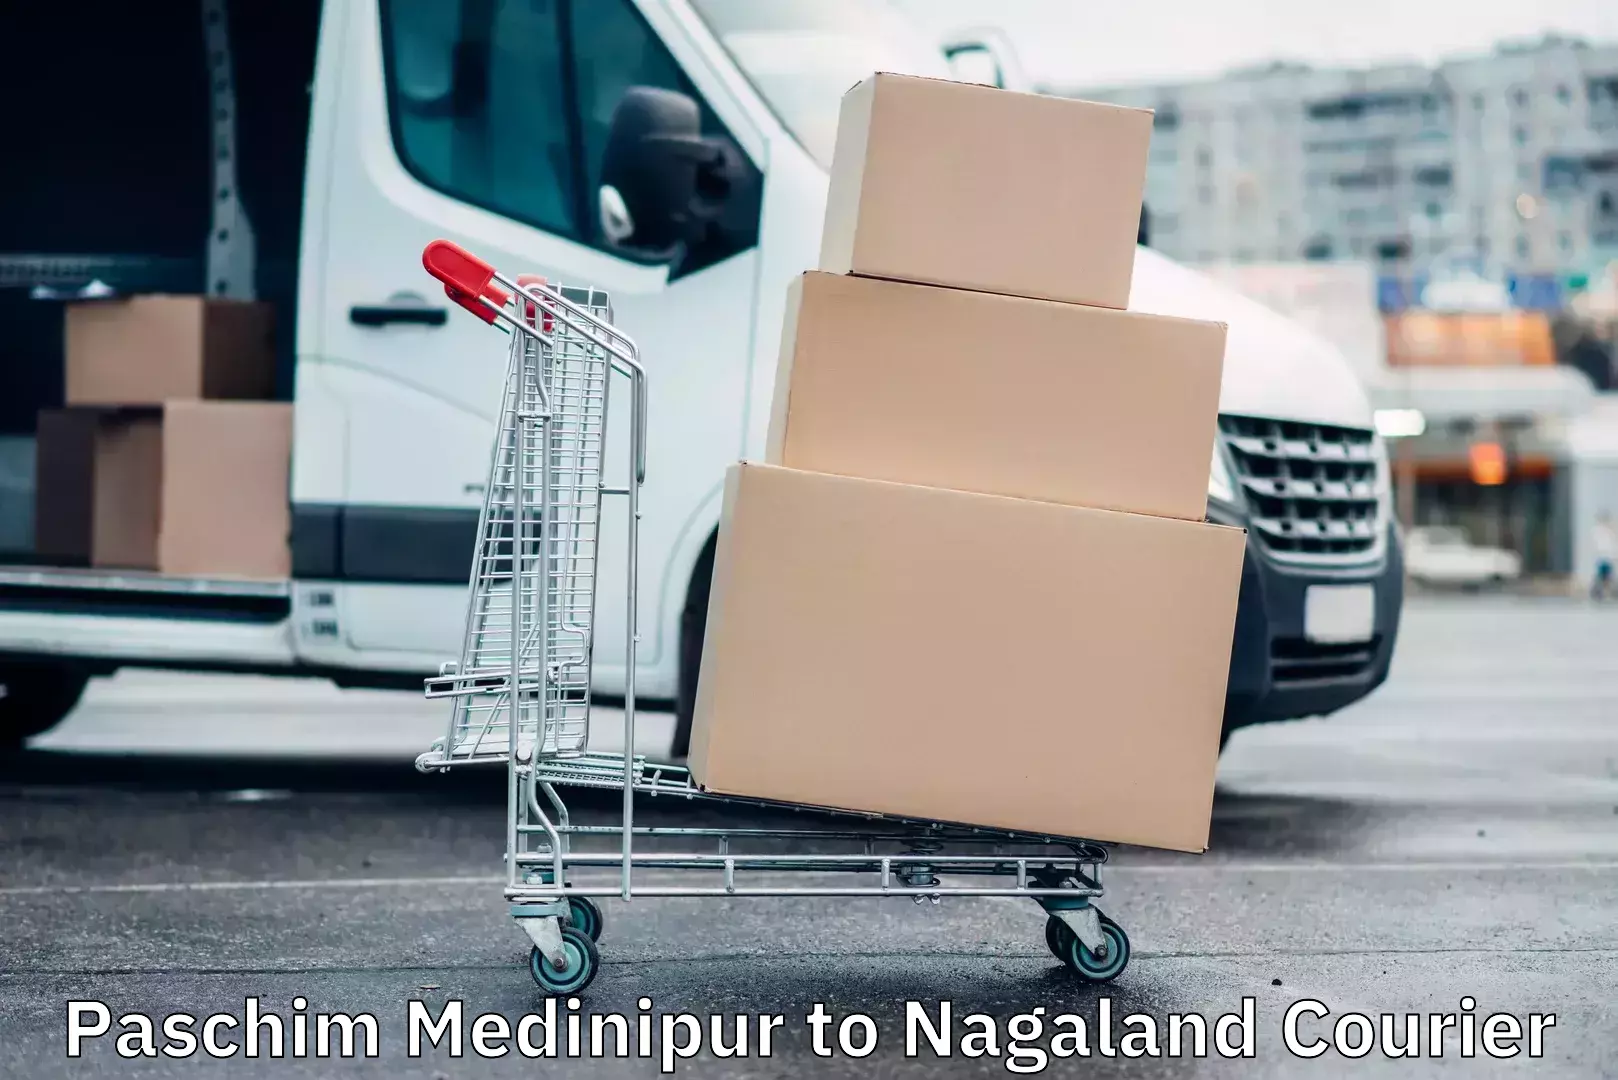 Reliable package handling Paschim Medinipur to Nagaland